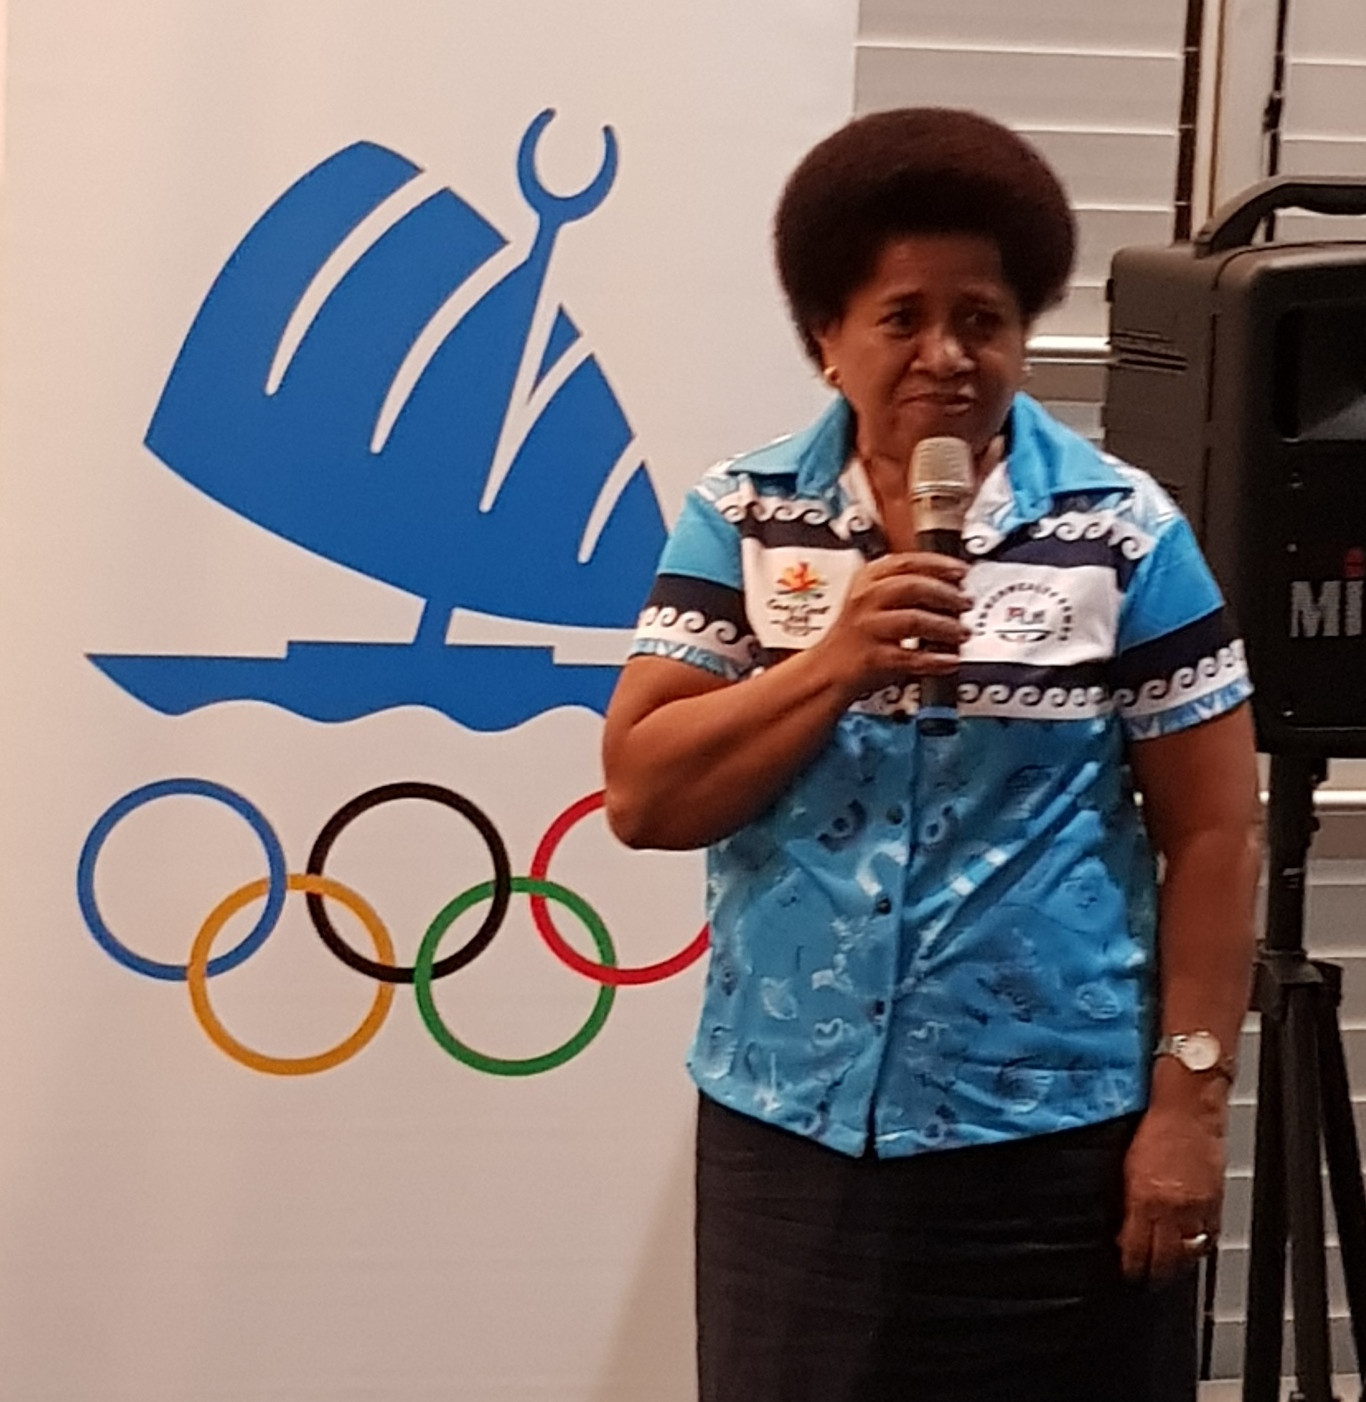 Makarita Lenoa has been elected President of the Fiji Association of Sports and National Olympic Committee after defeating Joe Rodan Senior in the election ©FASANOC